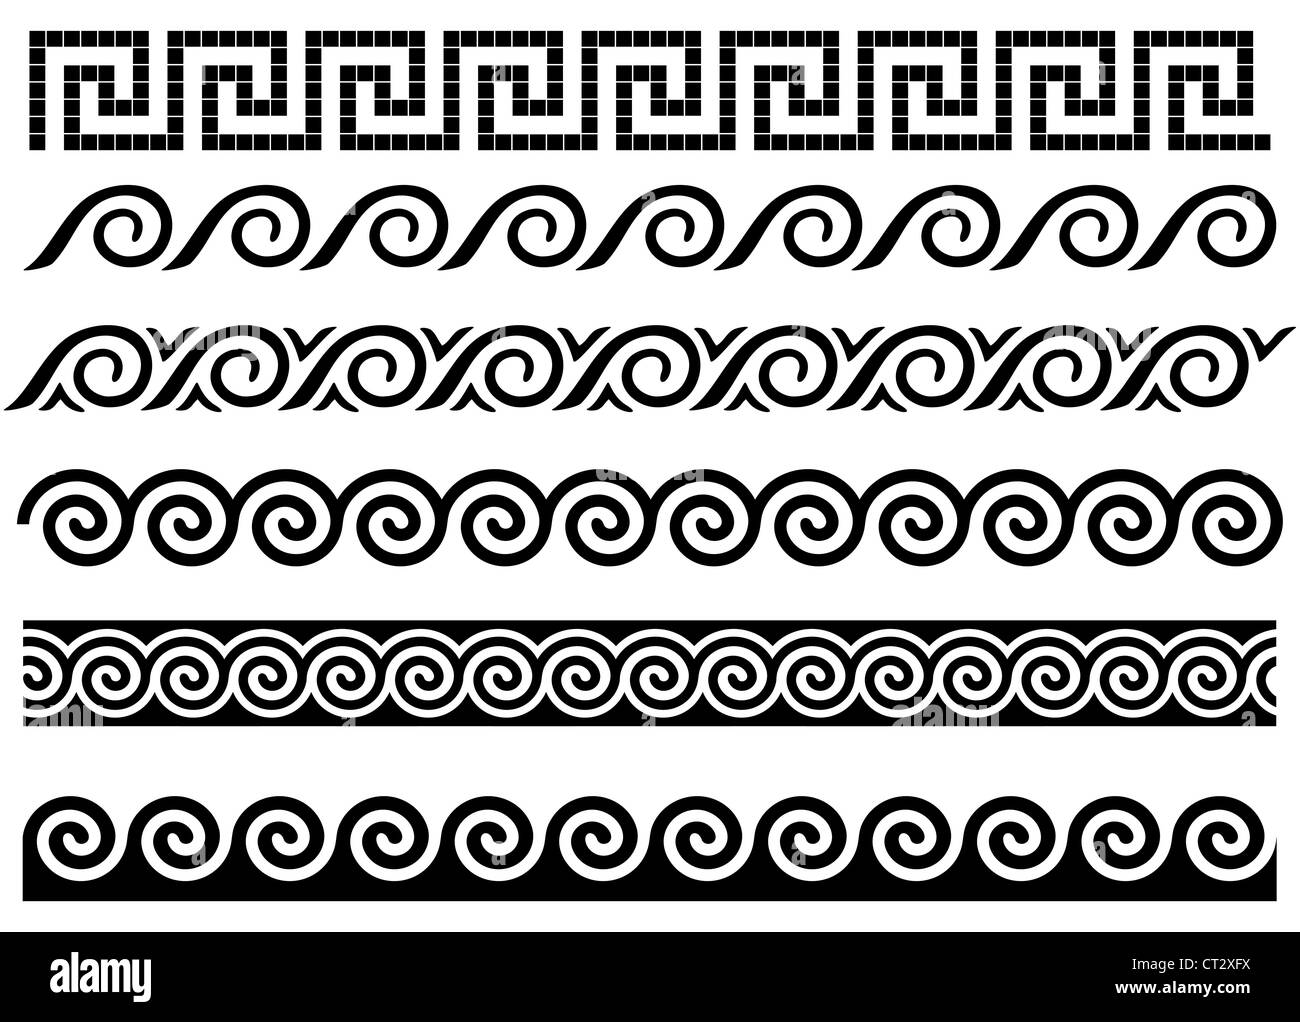 Ancient ornaments Black and White Stock Photos & Images - Alamy